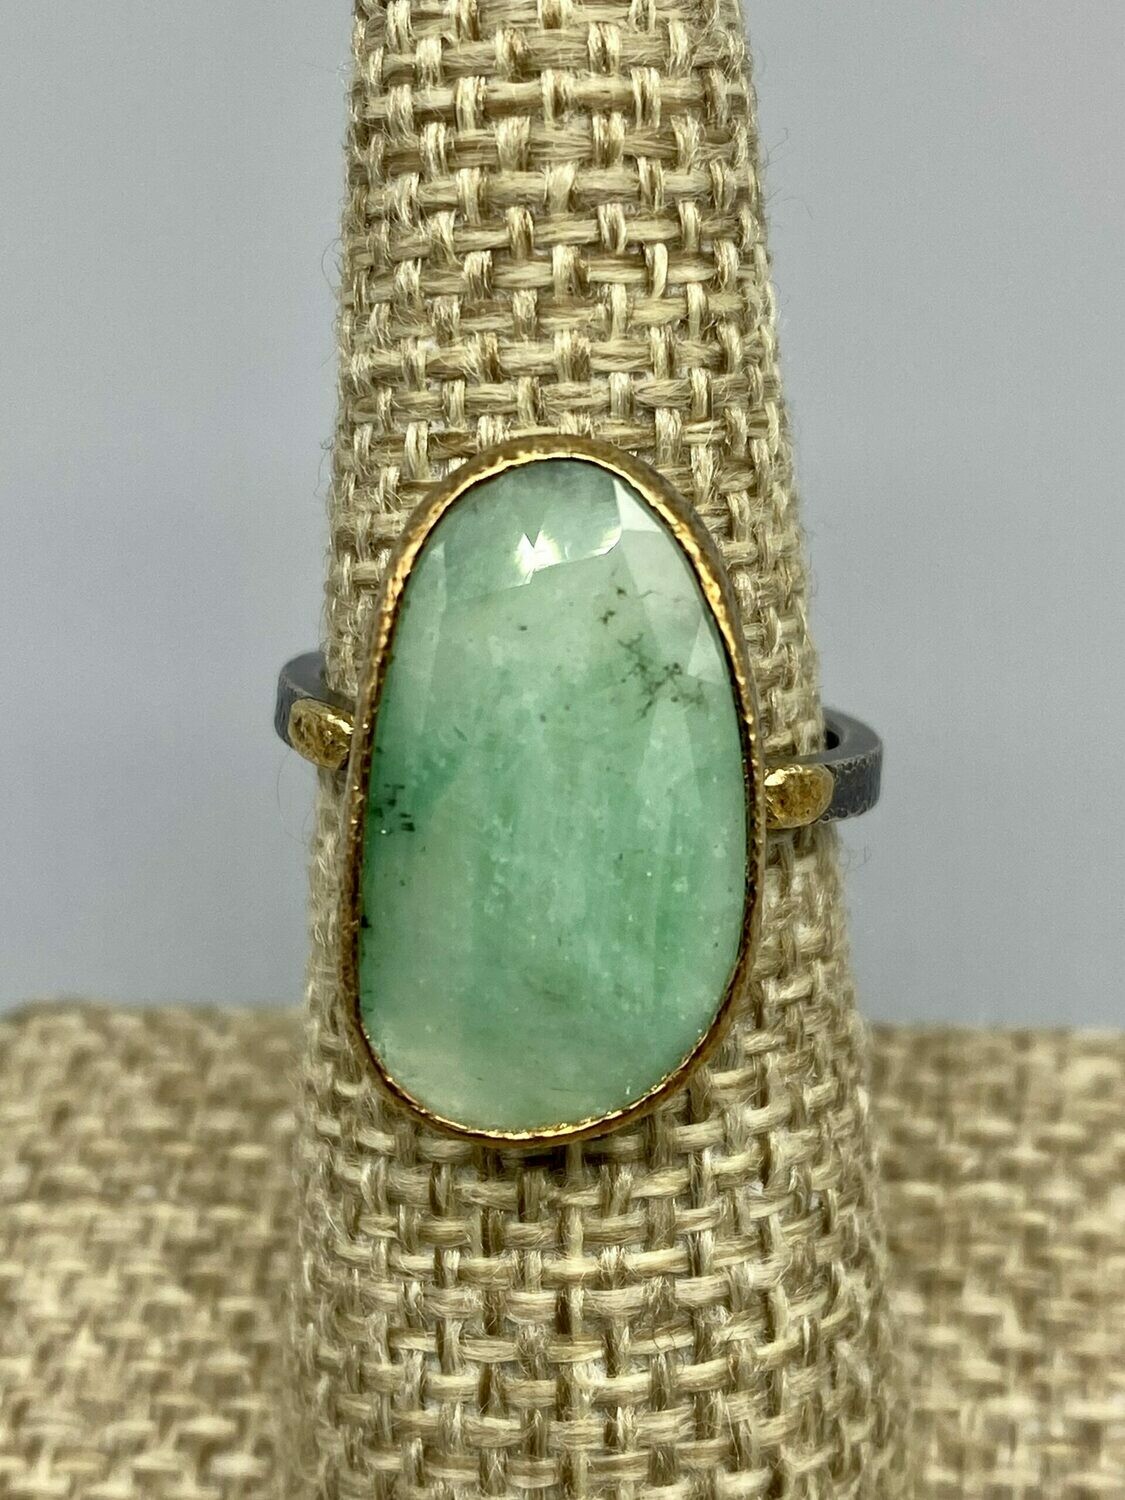 Sz 7 Emerald Ring (4.4 ct) in 18k and Sterling Silver - Rona Fisher Philadelphia PA